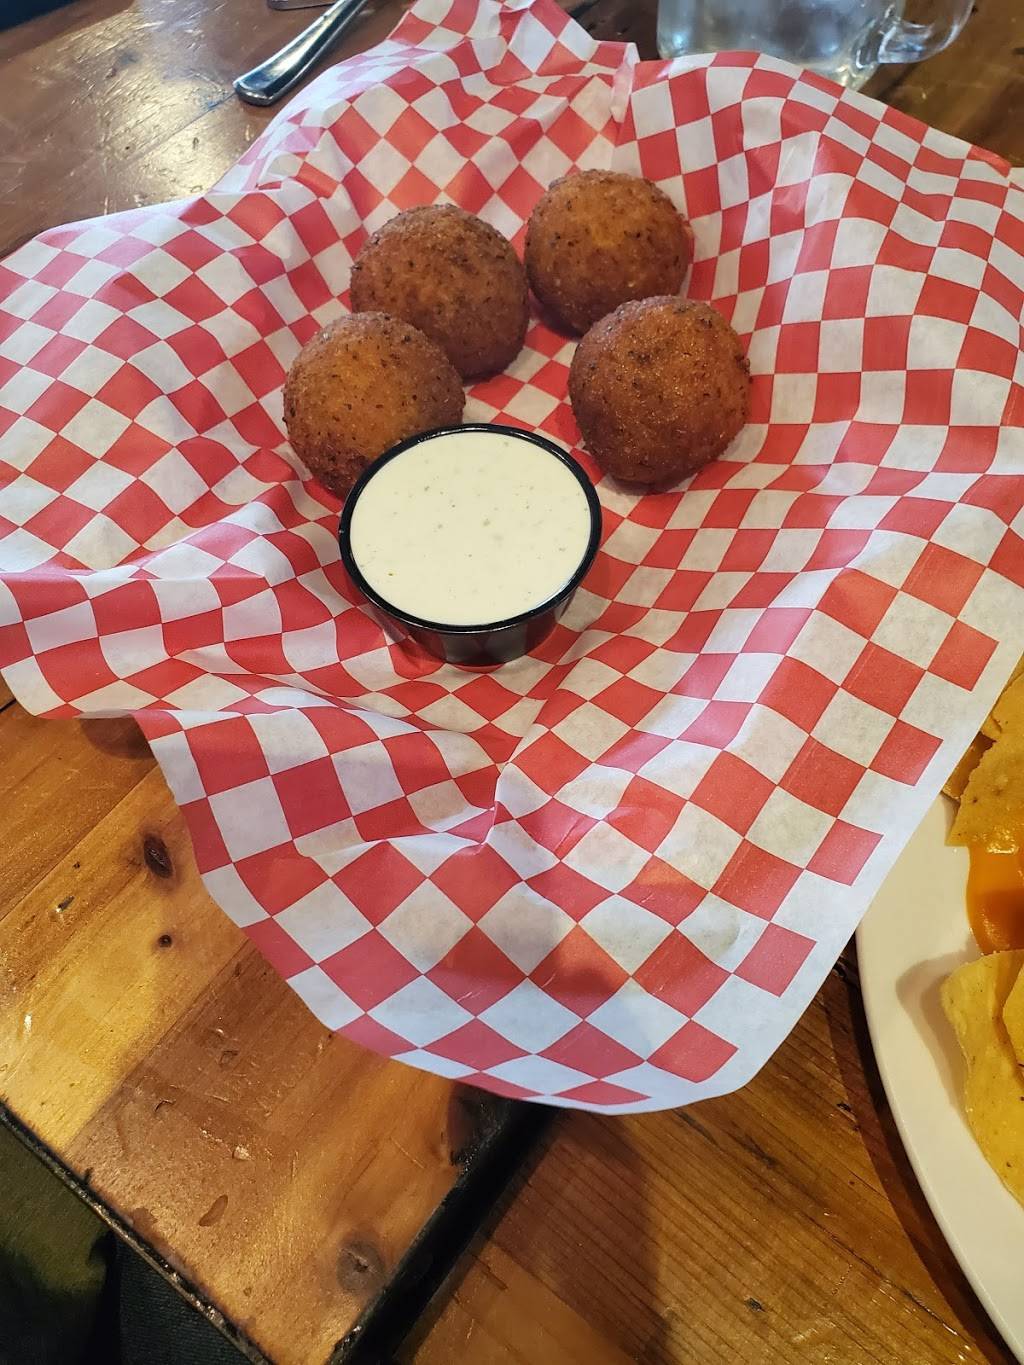 Big Al’s Down The Hatch | restaurant | 200 S Rogers St, Waxahachie, TX 75165, USA | 2149801120 OR +1 214-980-1120